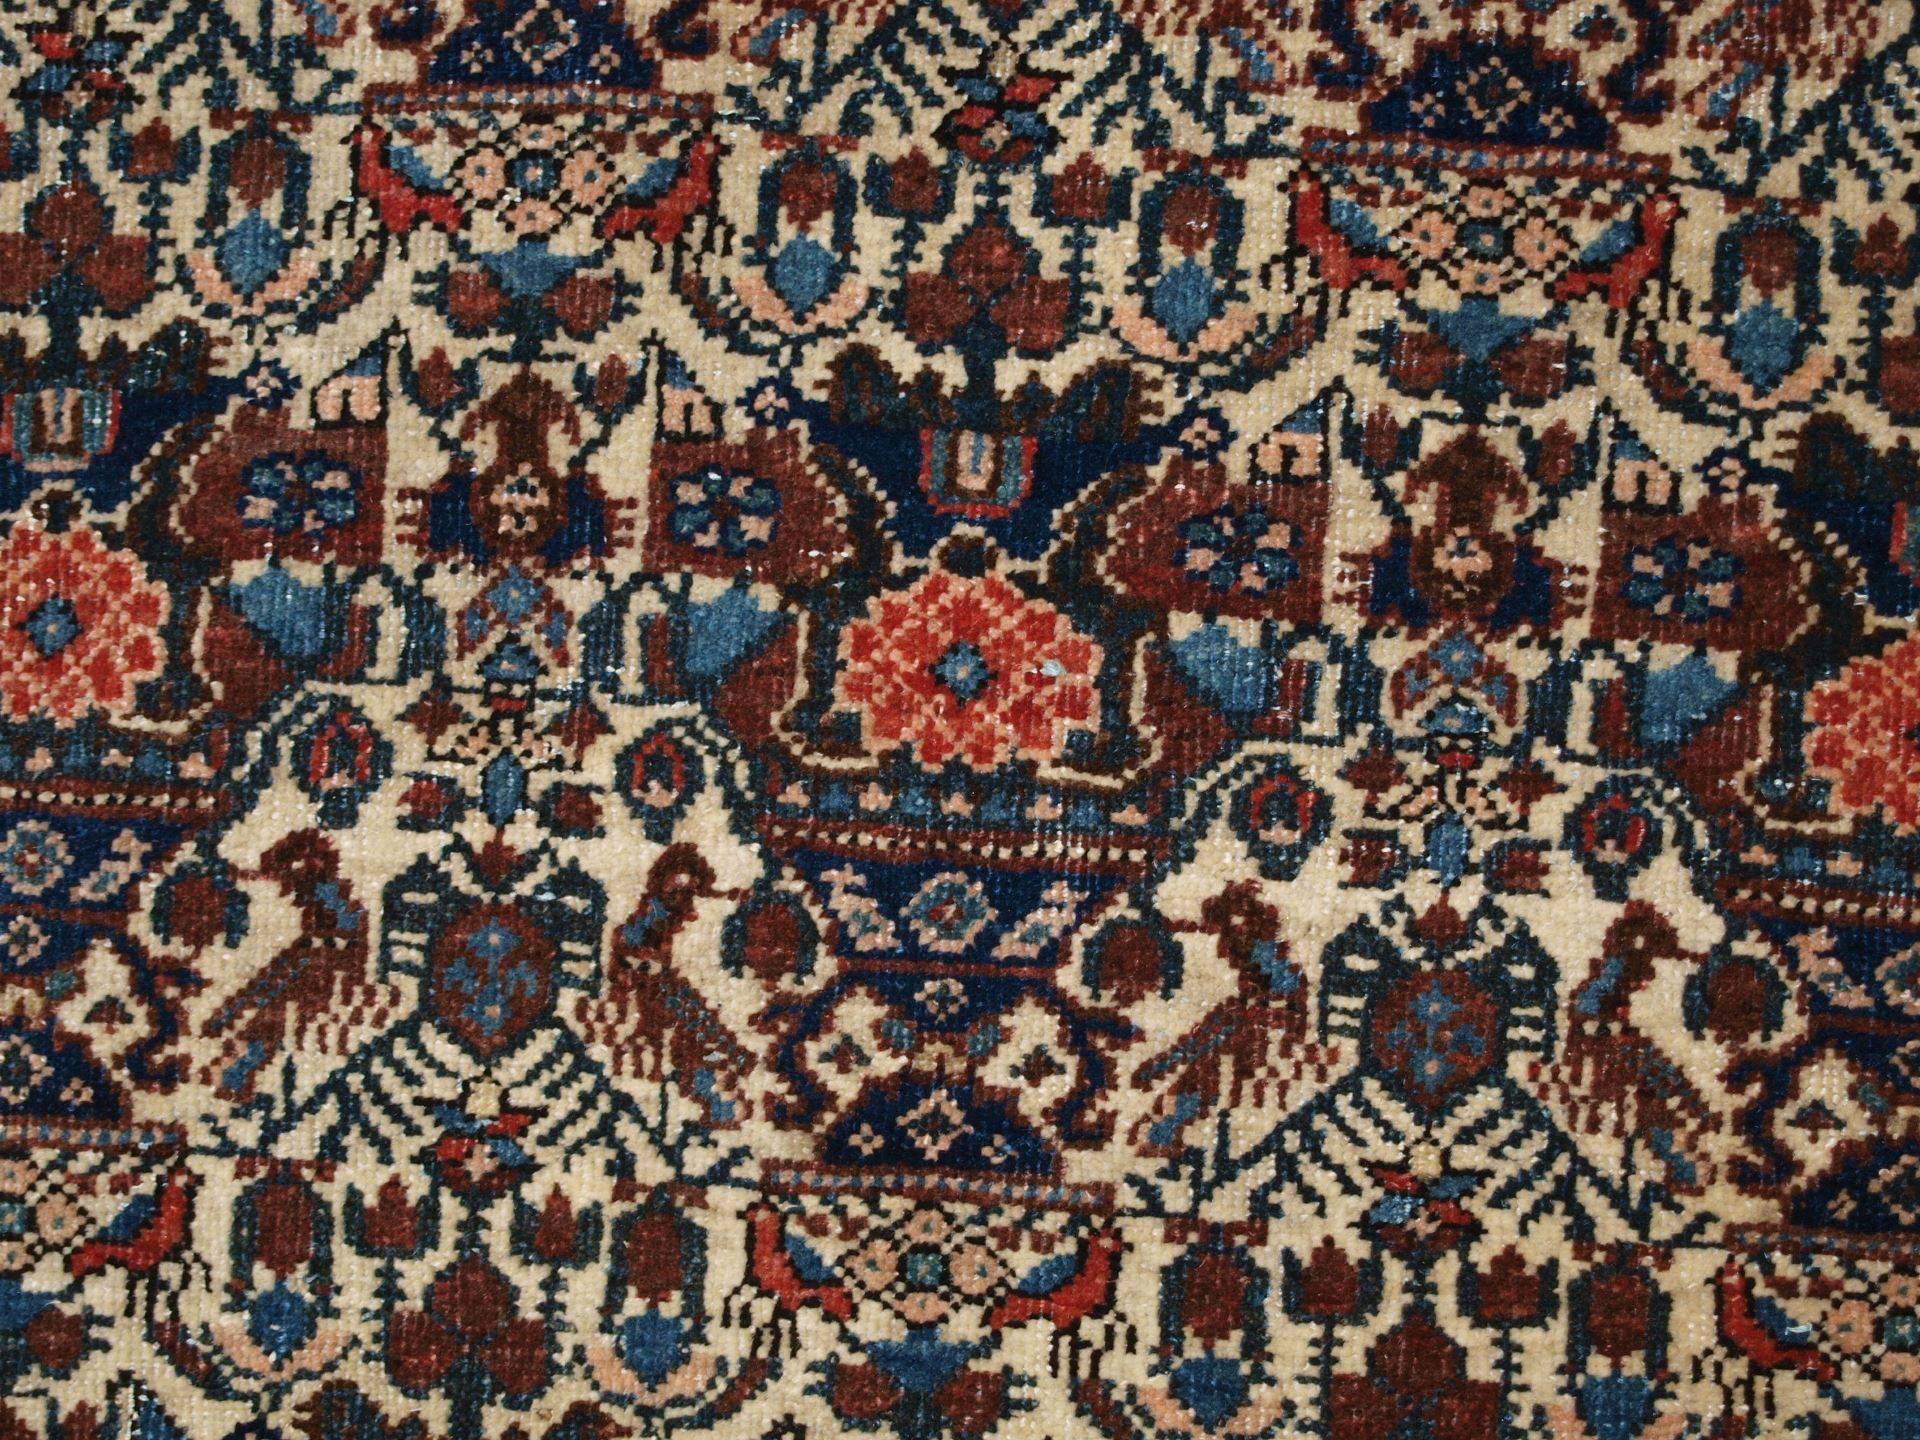 Wool Antique Abedeh Rug with the Classic ‘Vase and Peacock’ Design, circa 1900-1920